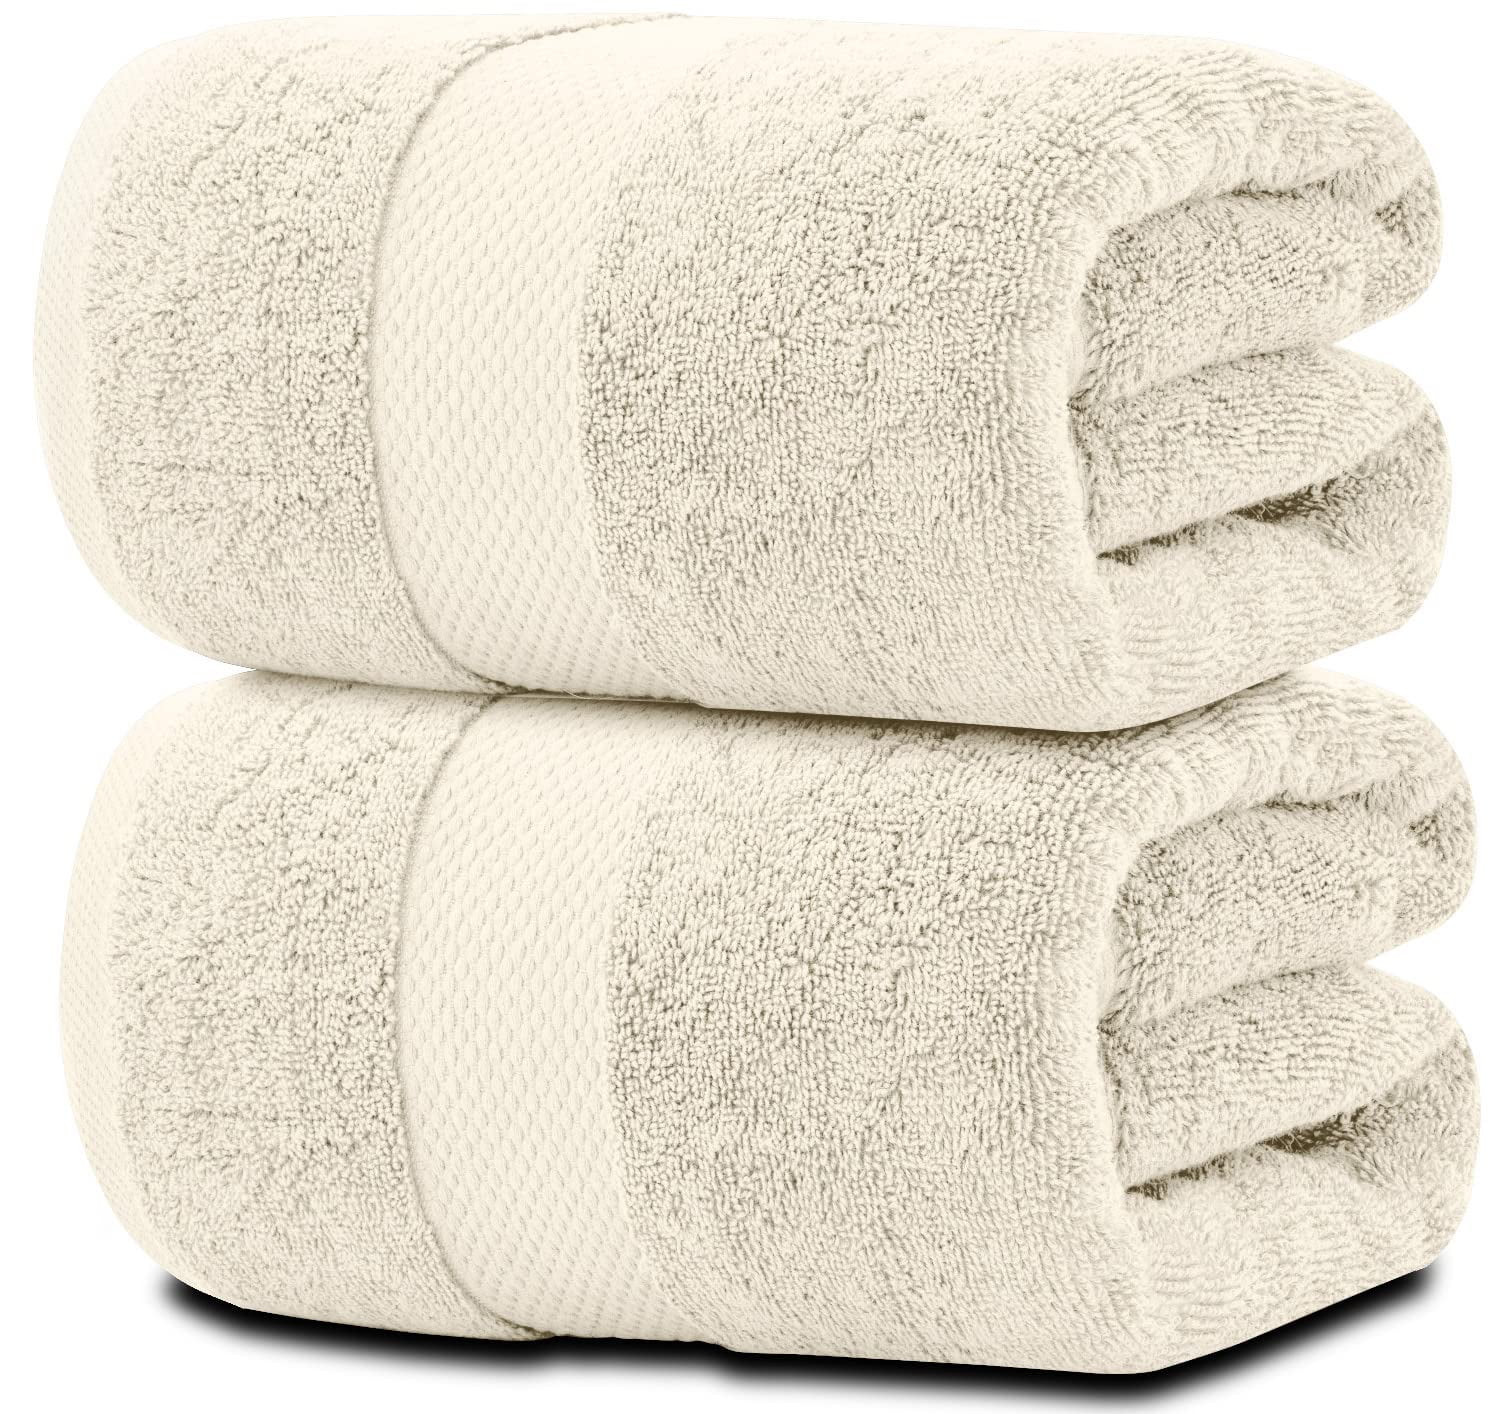 Imperial Towel Collection White Premium Quality